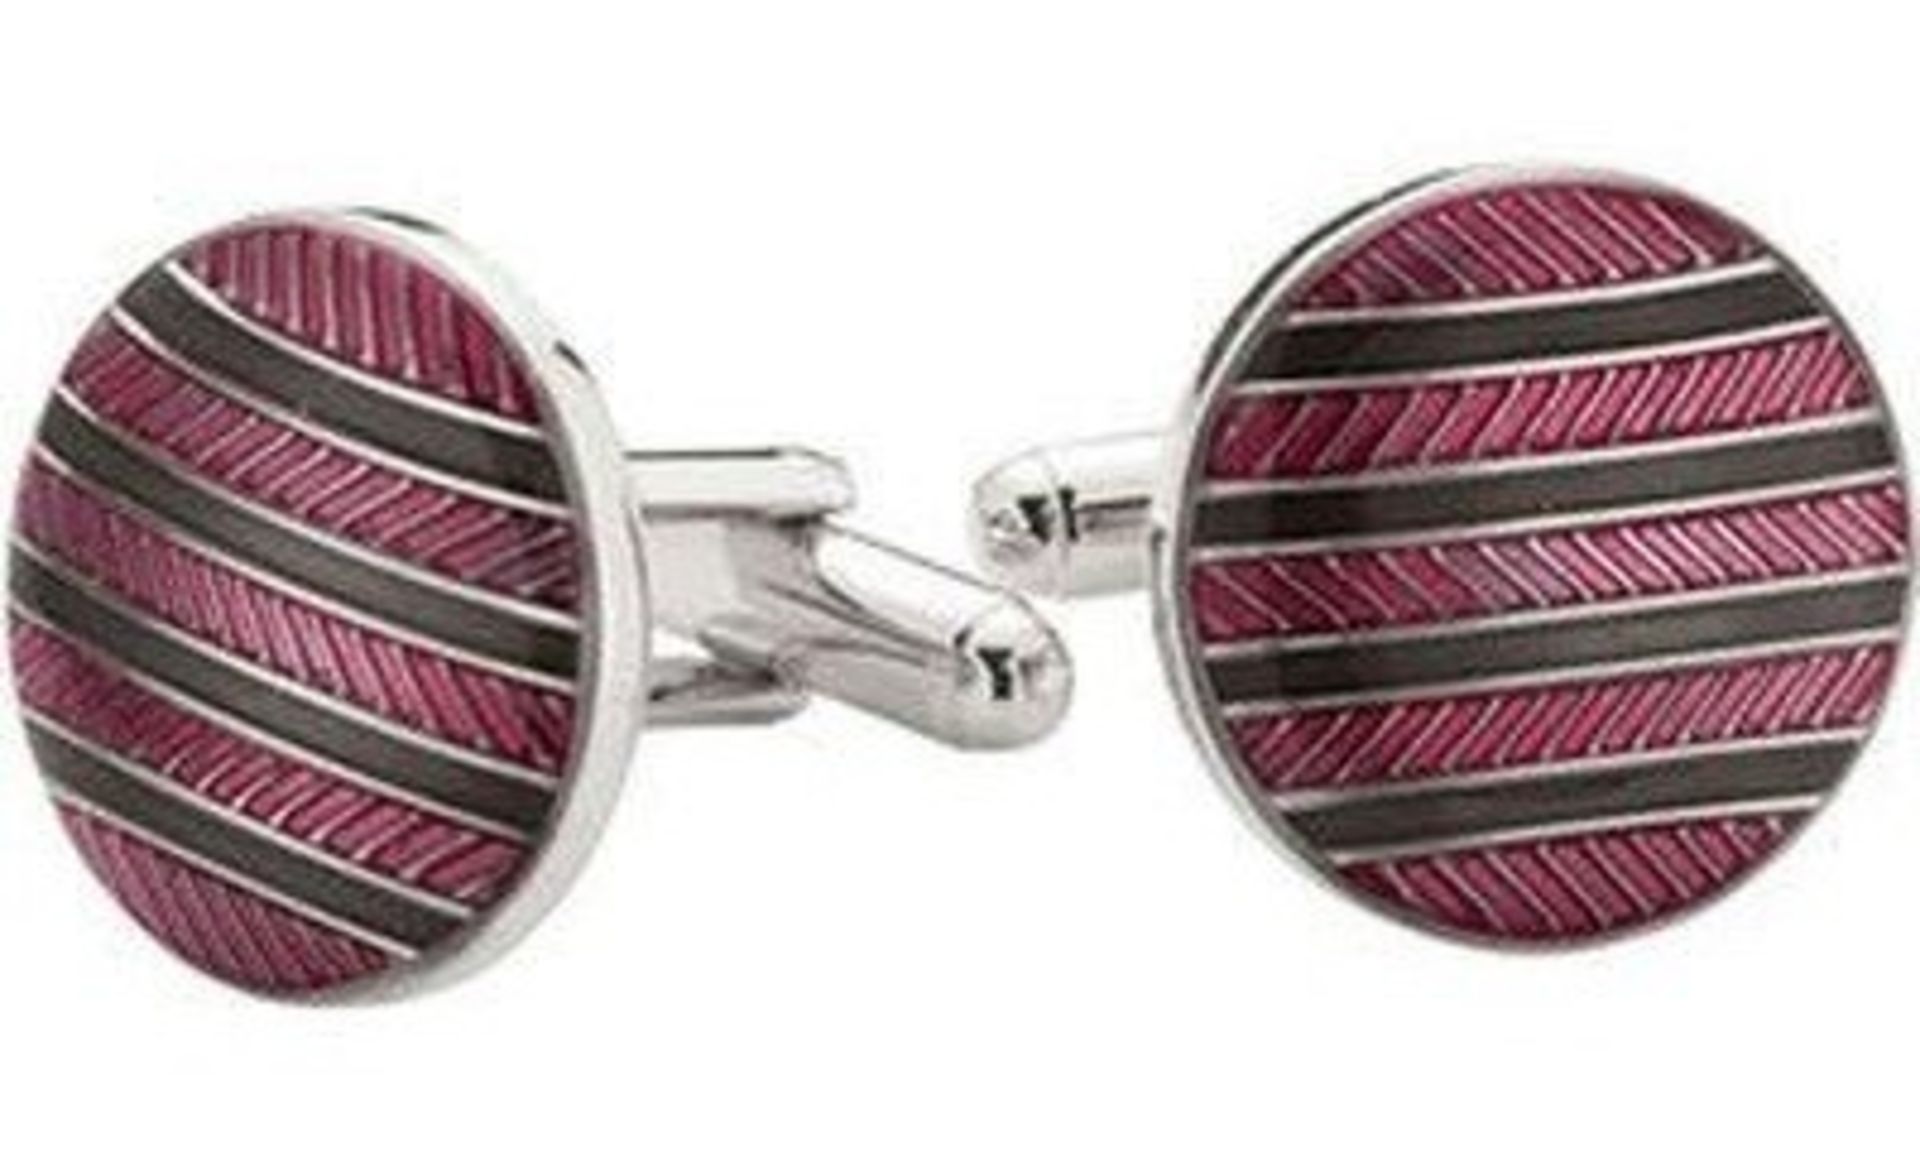 10 x Pairs of Genuine “Circle, Stripe” Enamel CUFFLINKS by Ice London – Silver Plated, 2 Colours